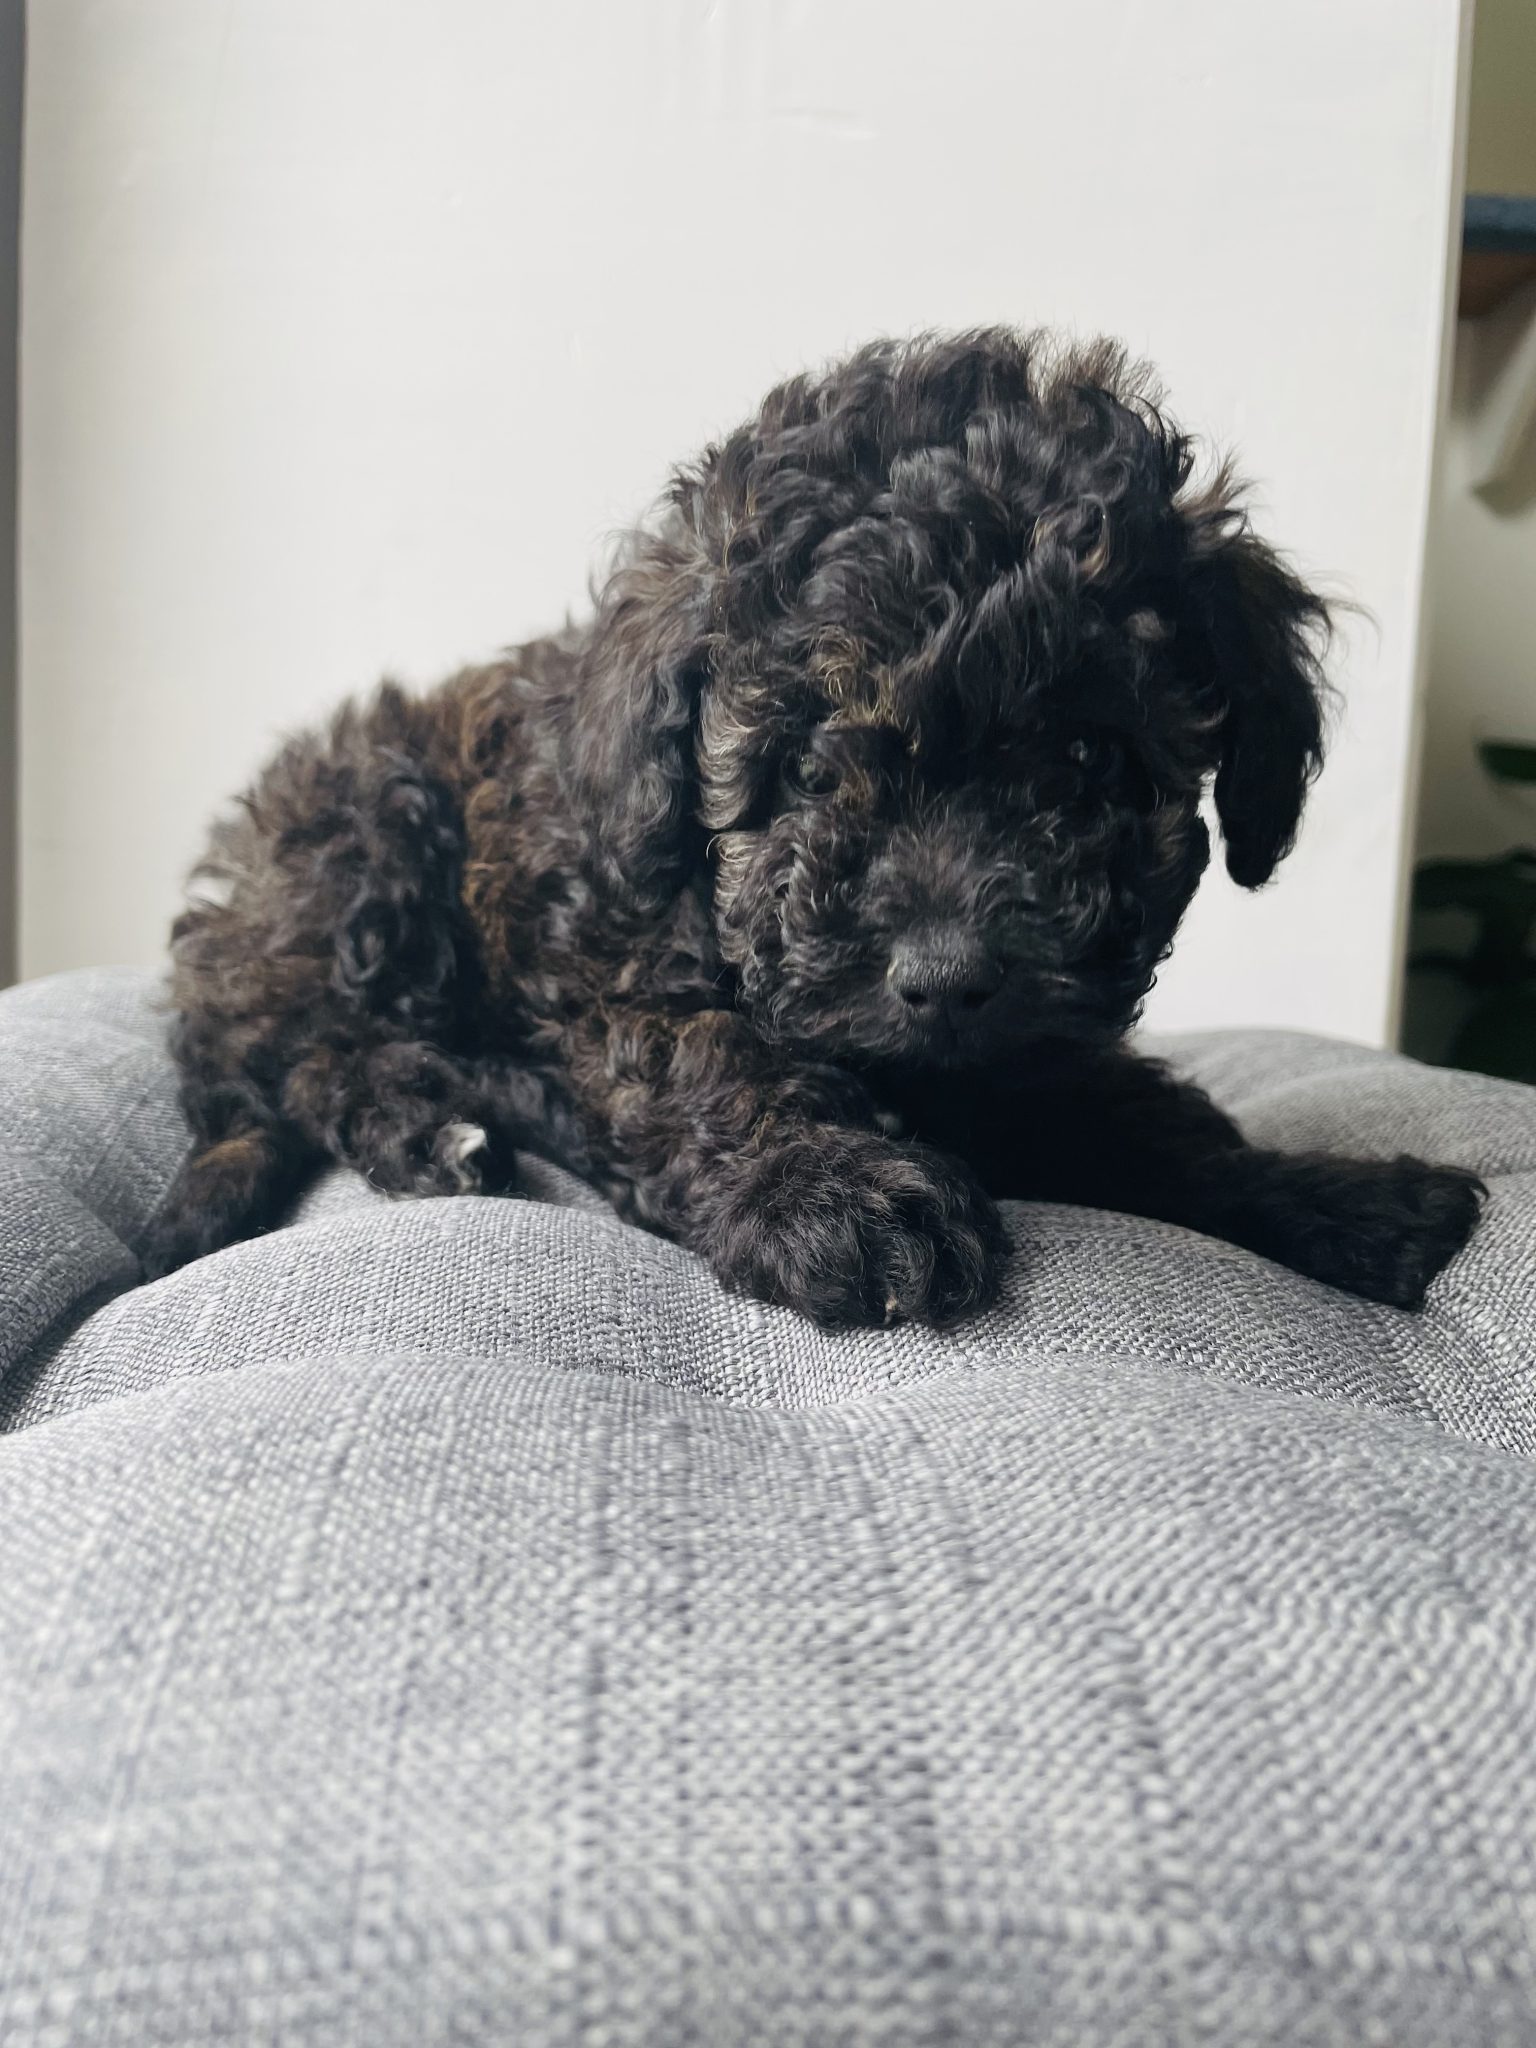 3 absolutely beautiful Mini poodle babies